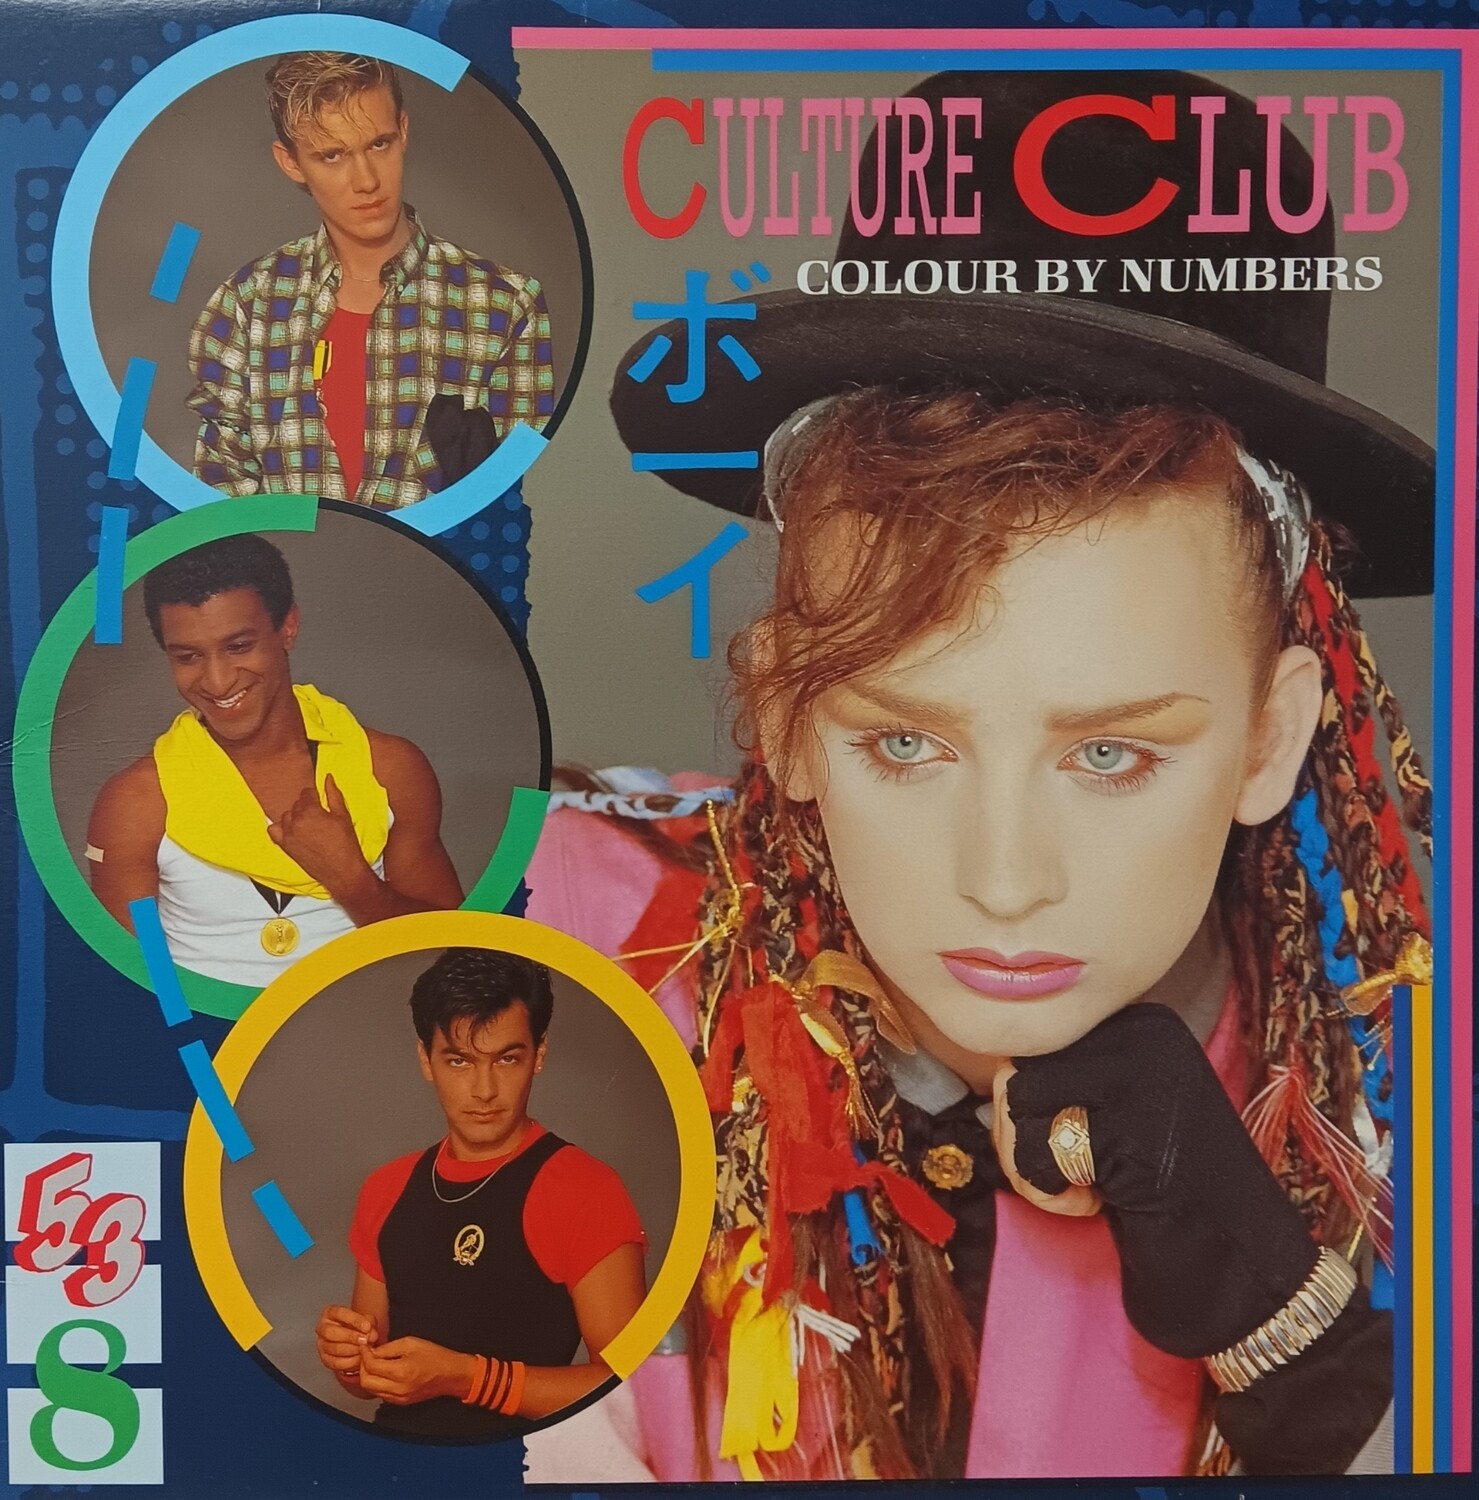 CULTURE CLUB - Colour by numbers